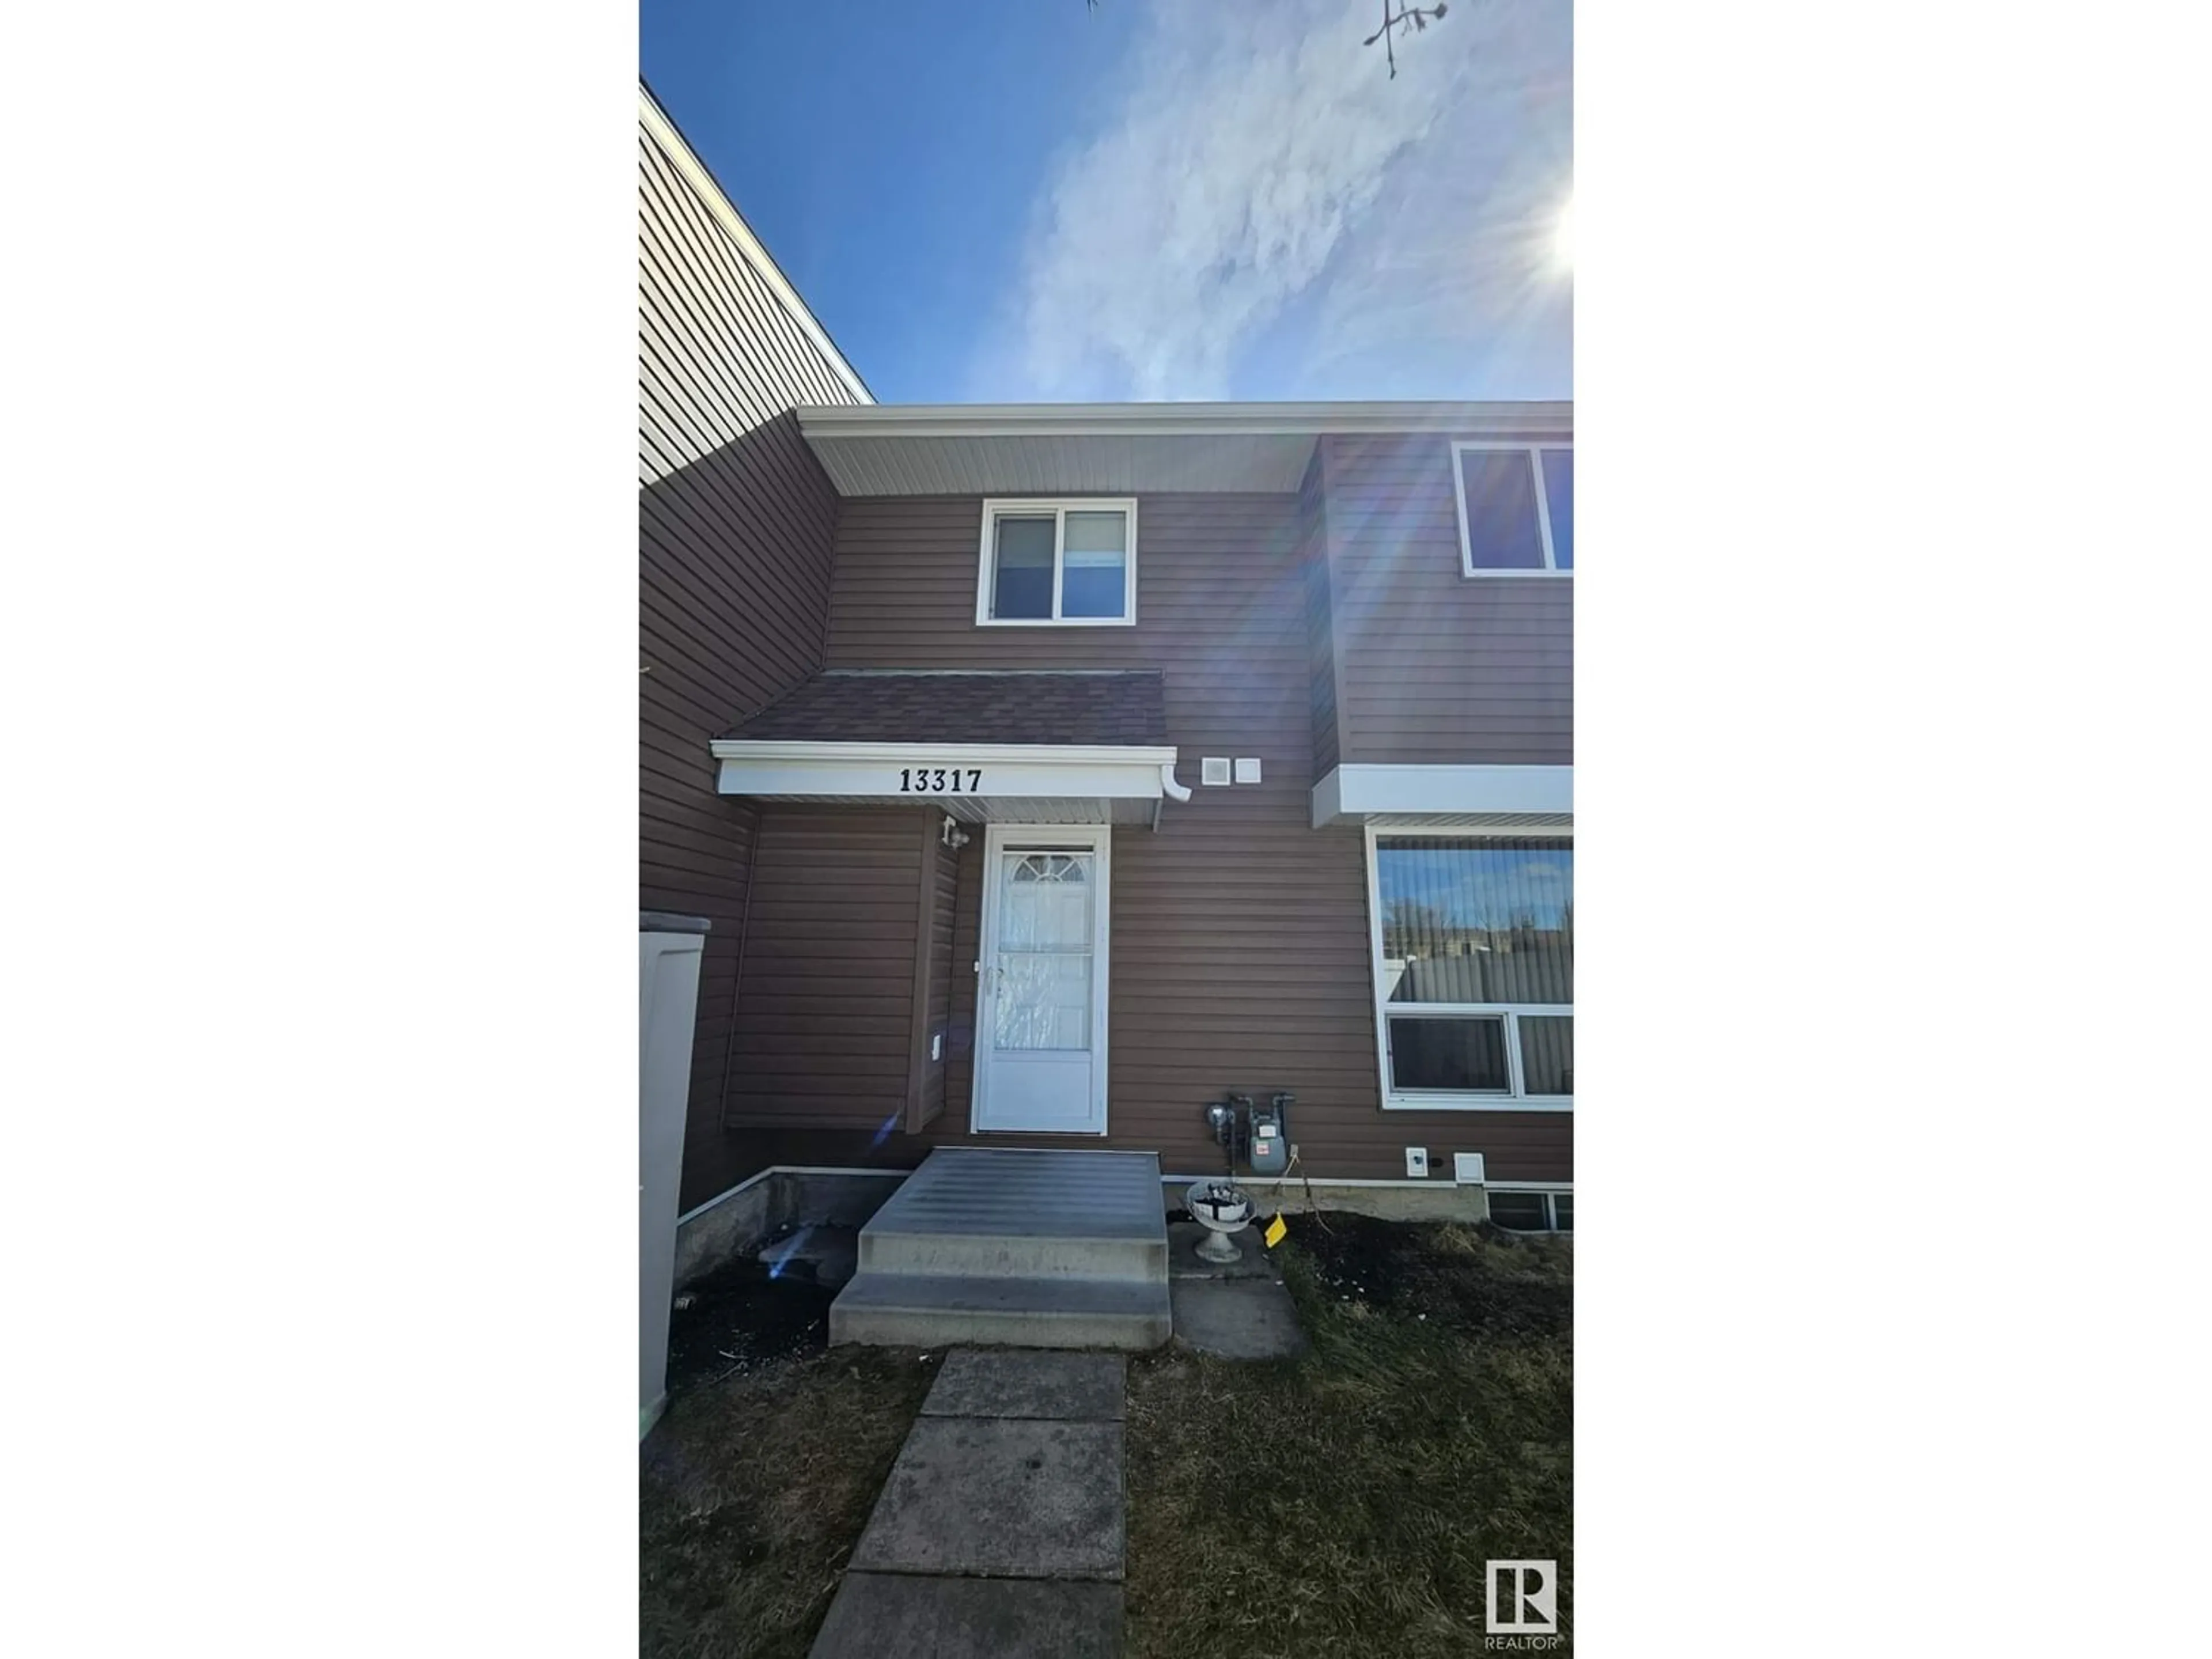 A pic from exterior of the house or condo for 13317 47 ST NW, Edmonton Alberta T5A3L5